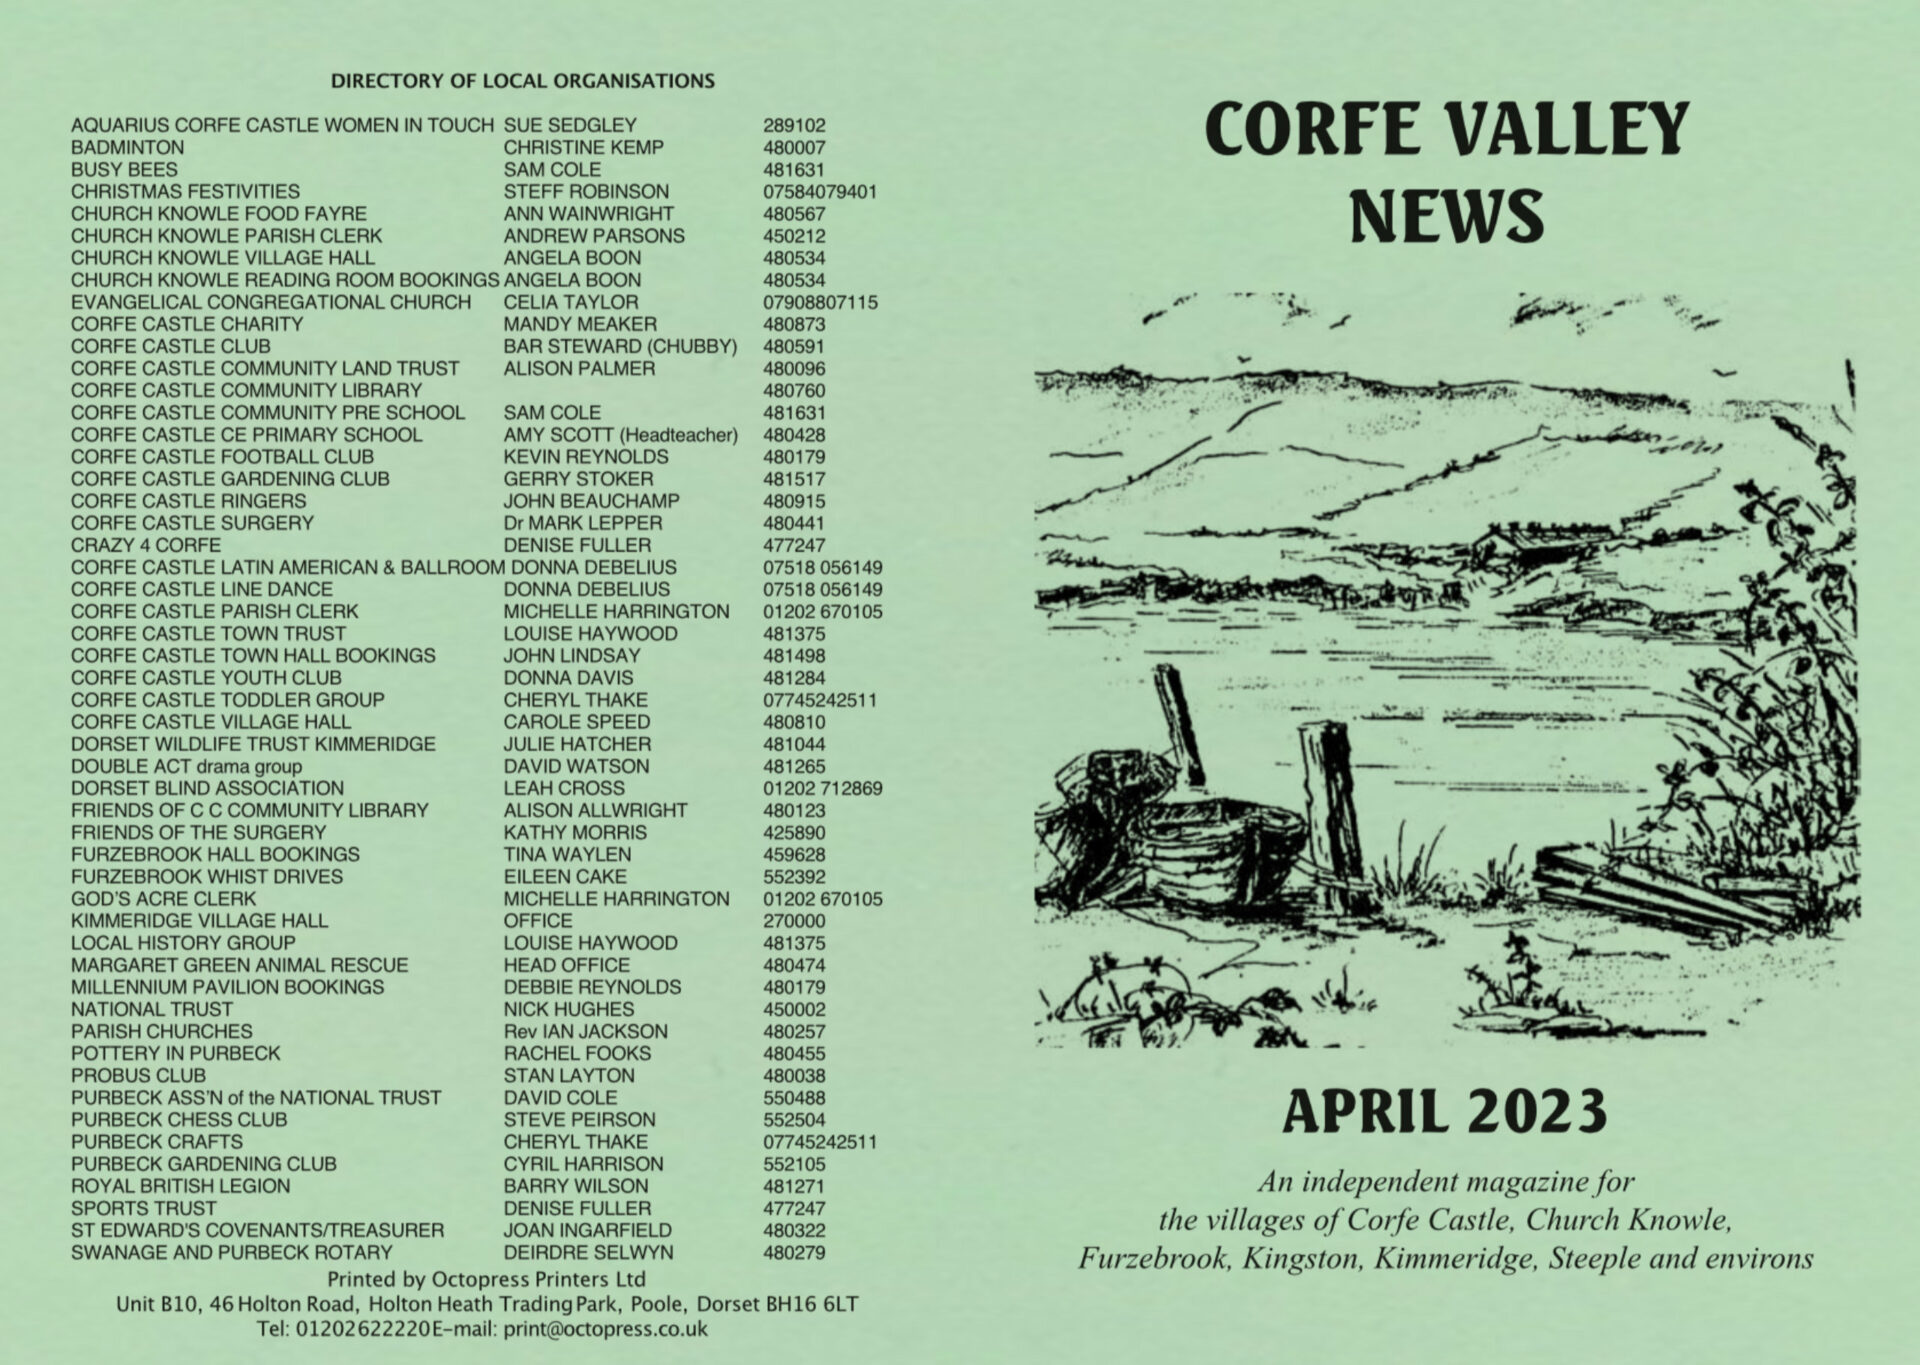 April 2023 issues of the Corfe Valley News